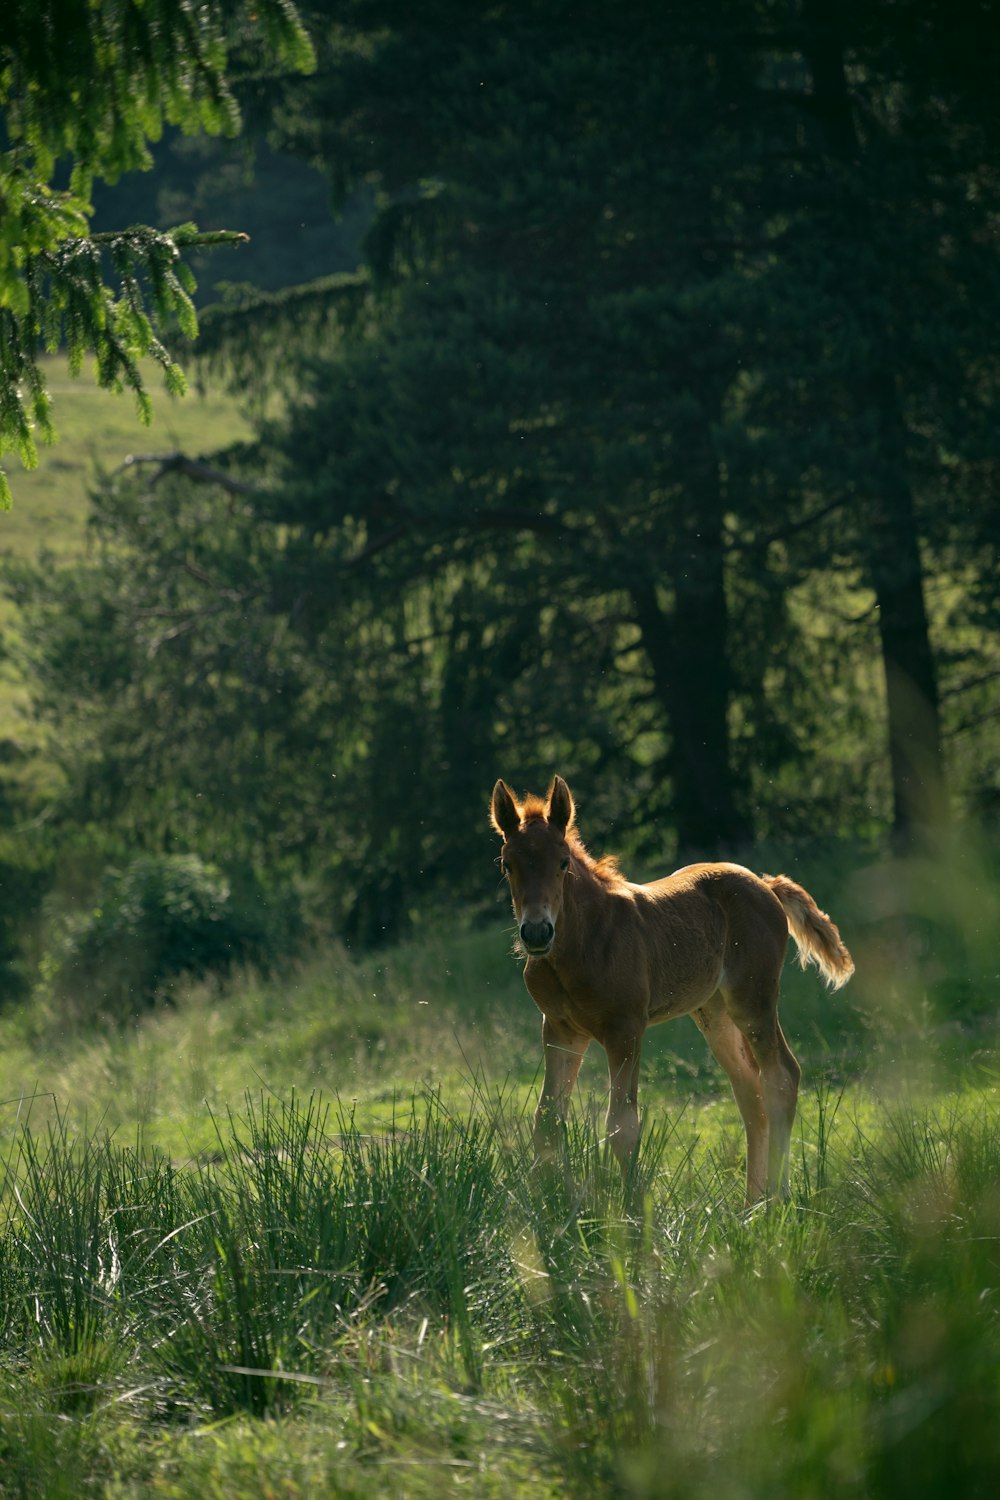 a brown horse standing in a lush green field